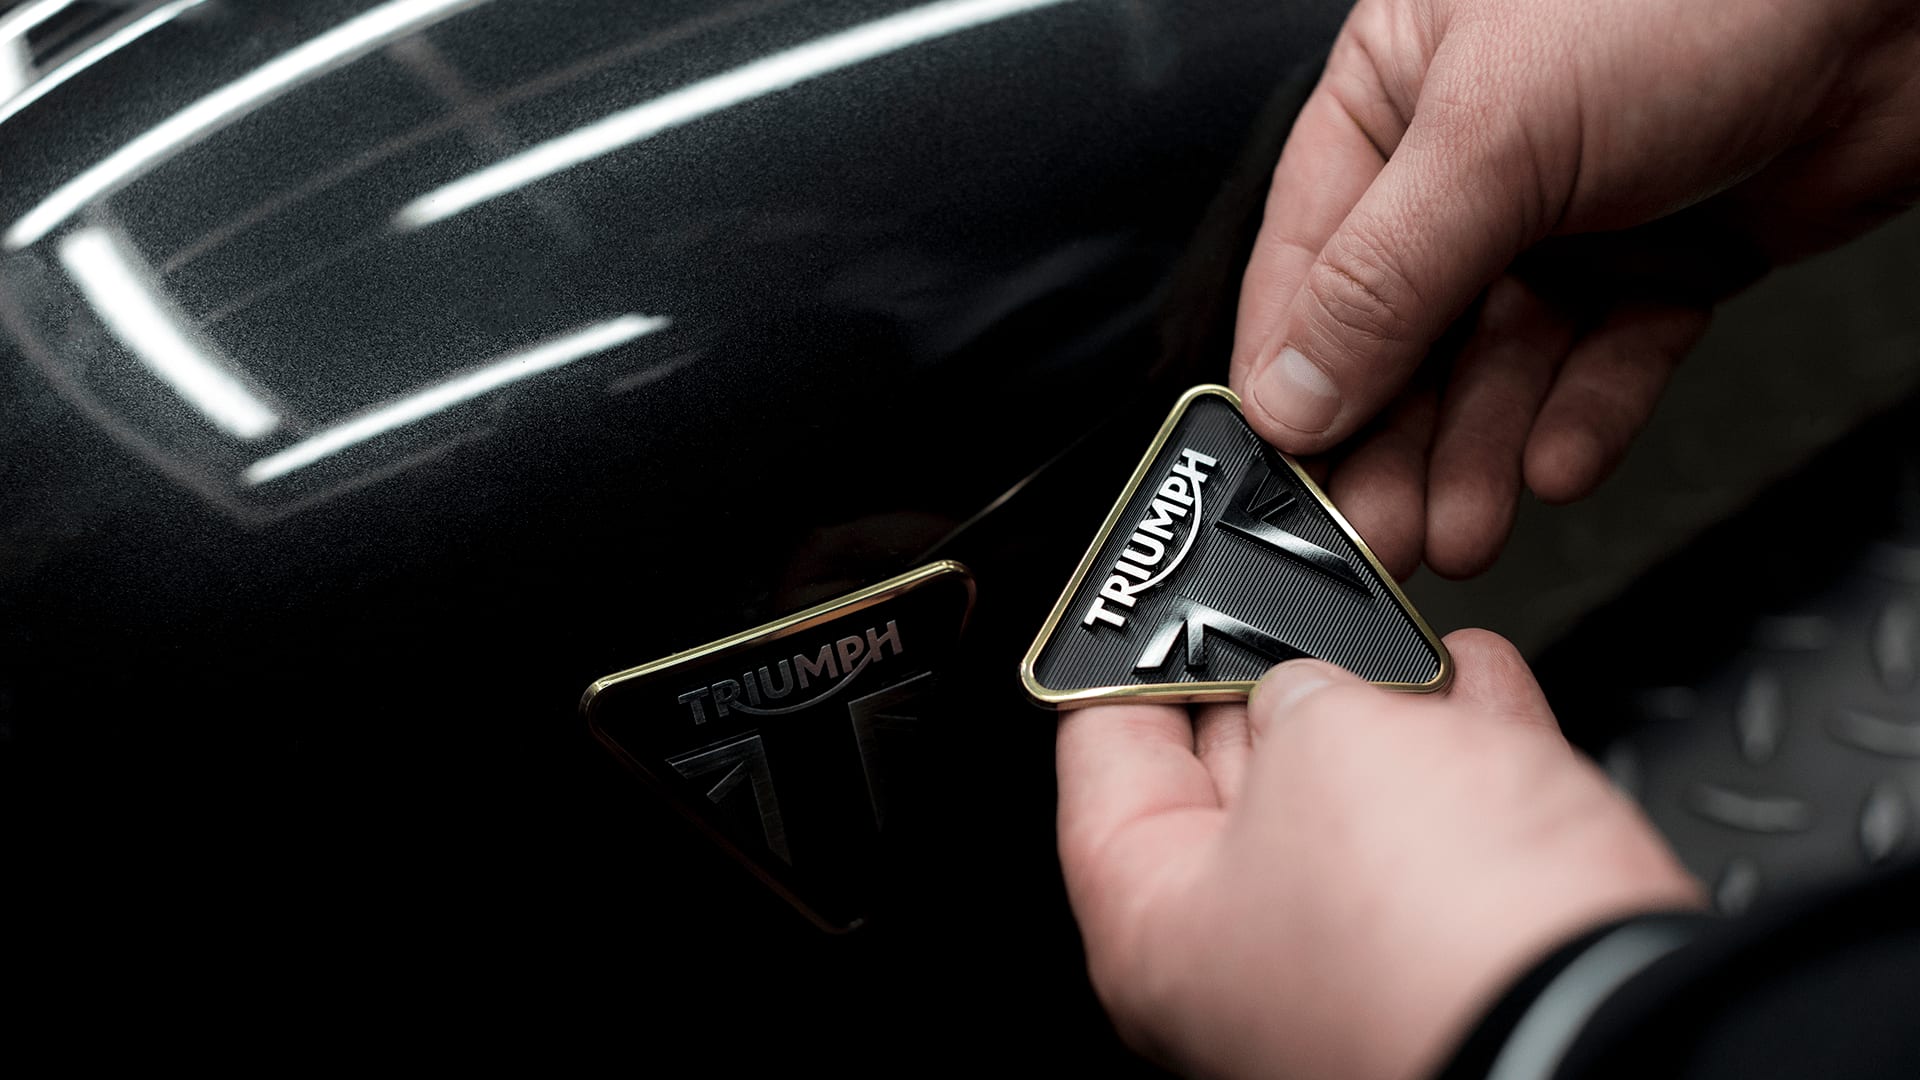 Triumph Thruxton TFC gold detailing and badging